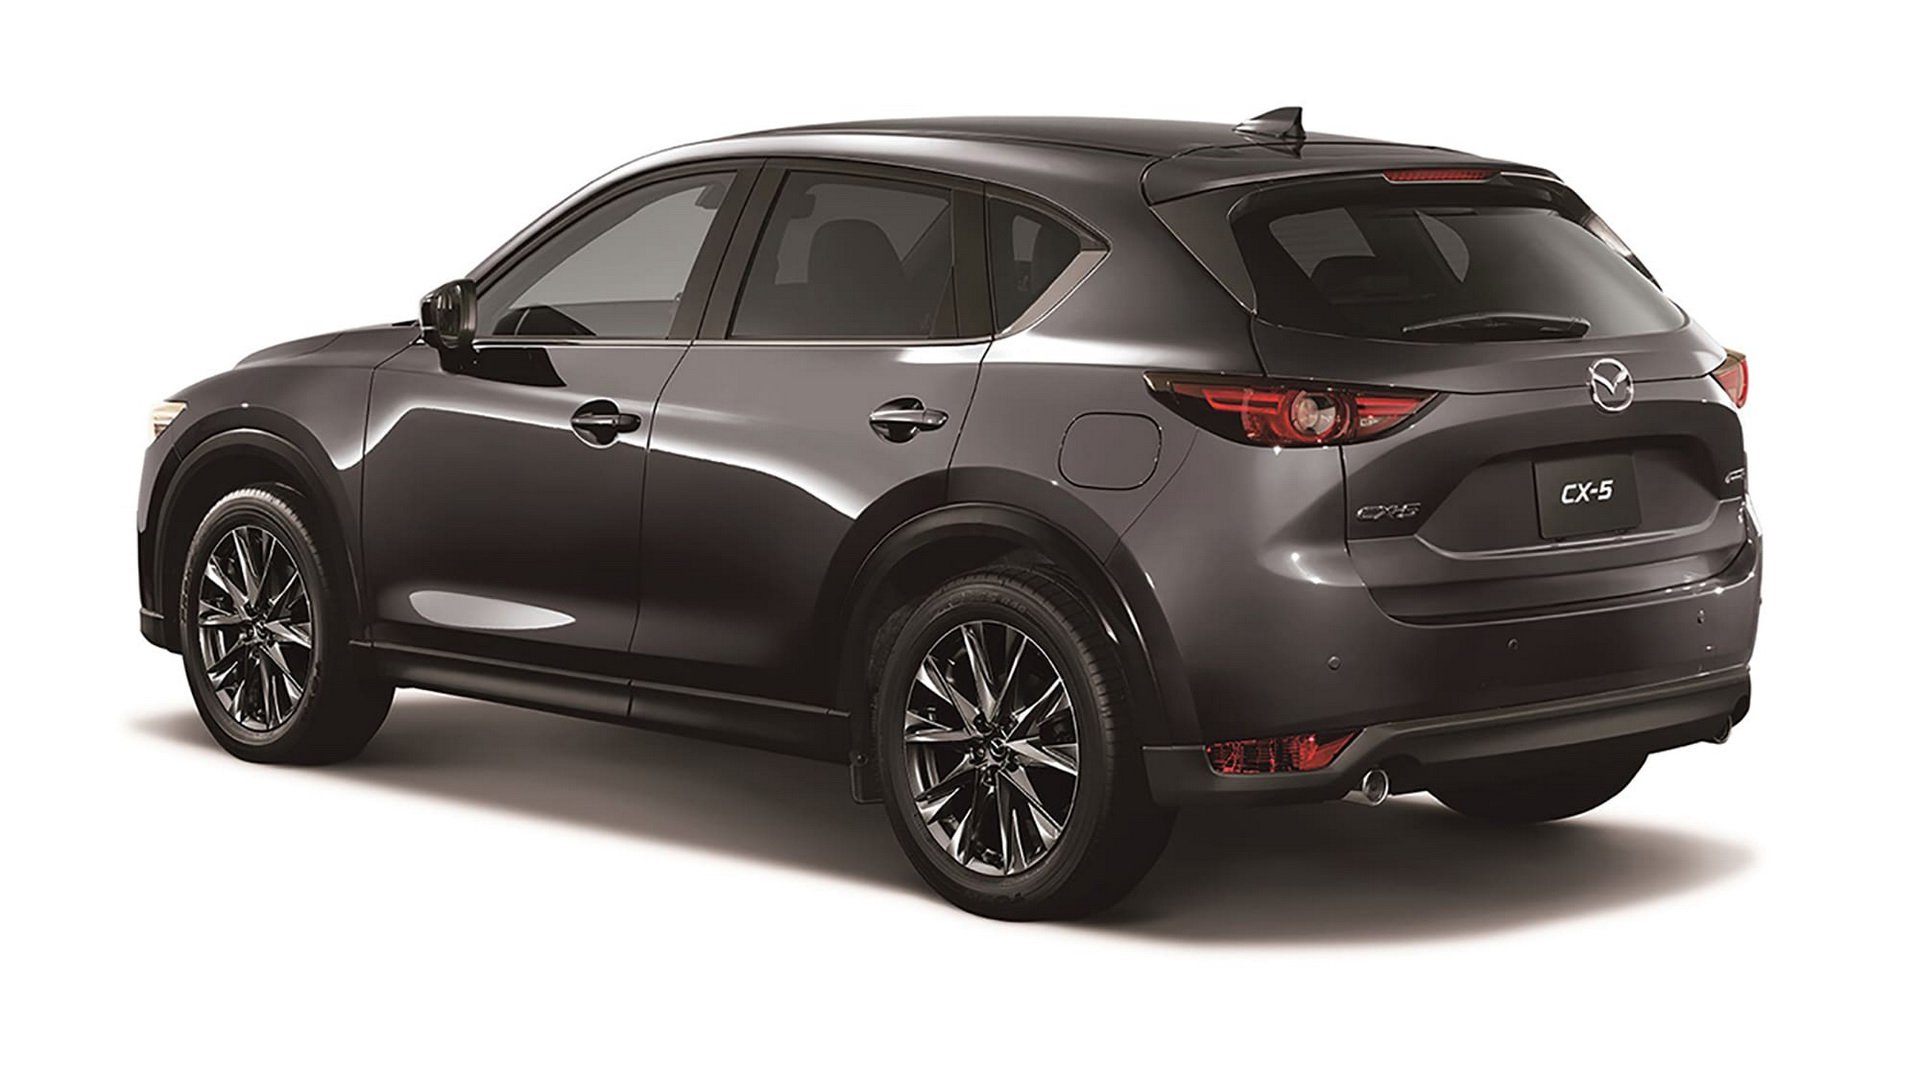 2019 Mazda CX-5 Gets 2.5-Liter Turbo, Android Auto and Apple CarPlay in ...